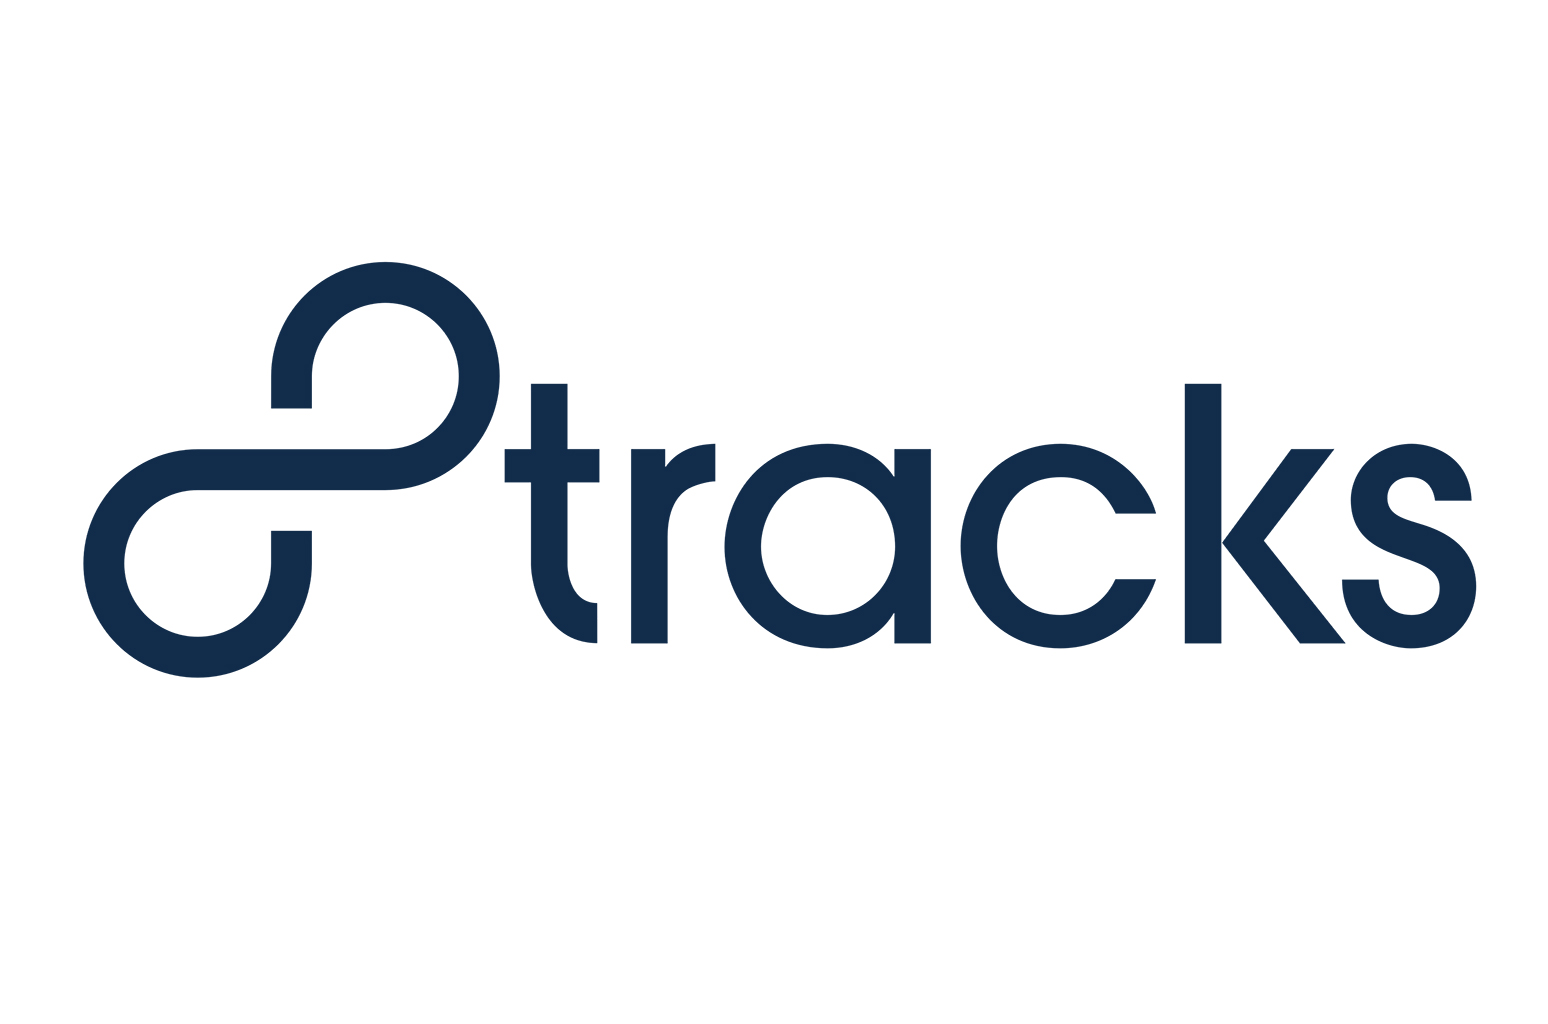 8tracks has returned in the hopes of becoming your favourite music discovery platform